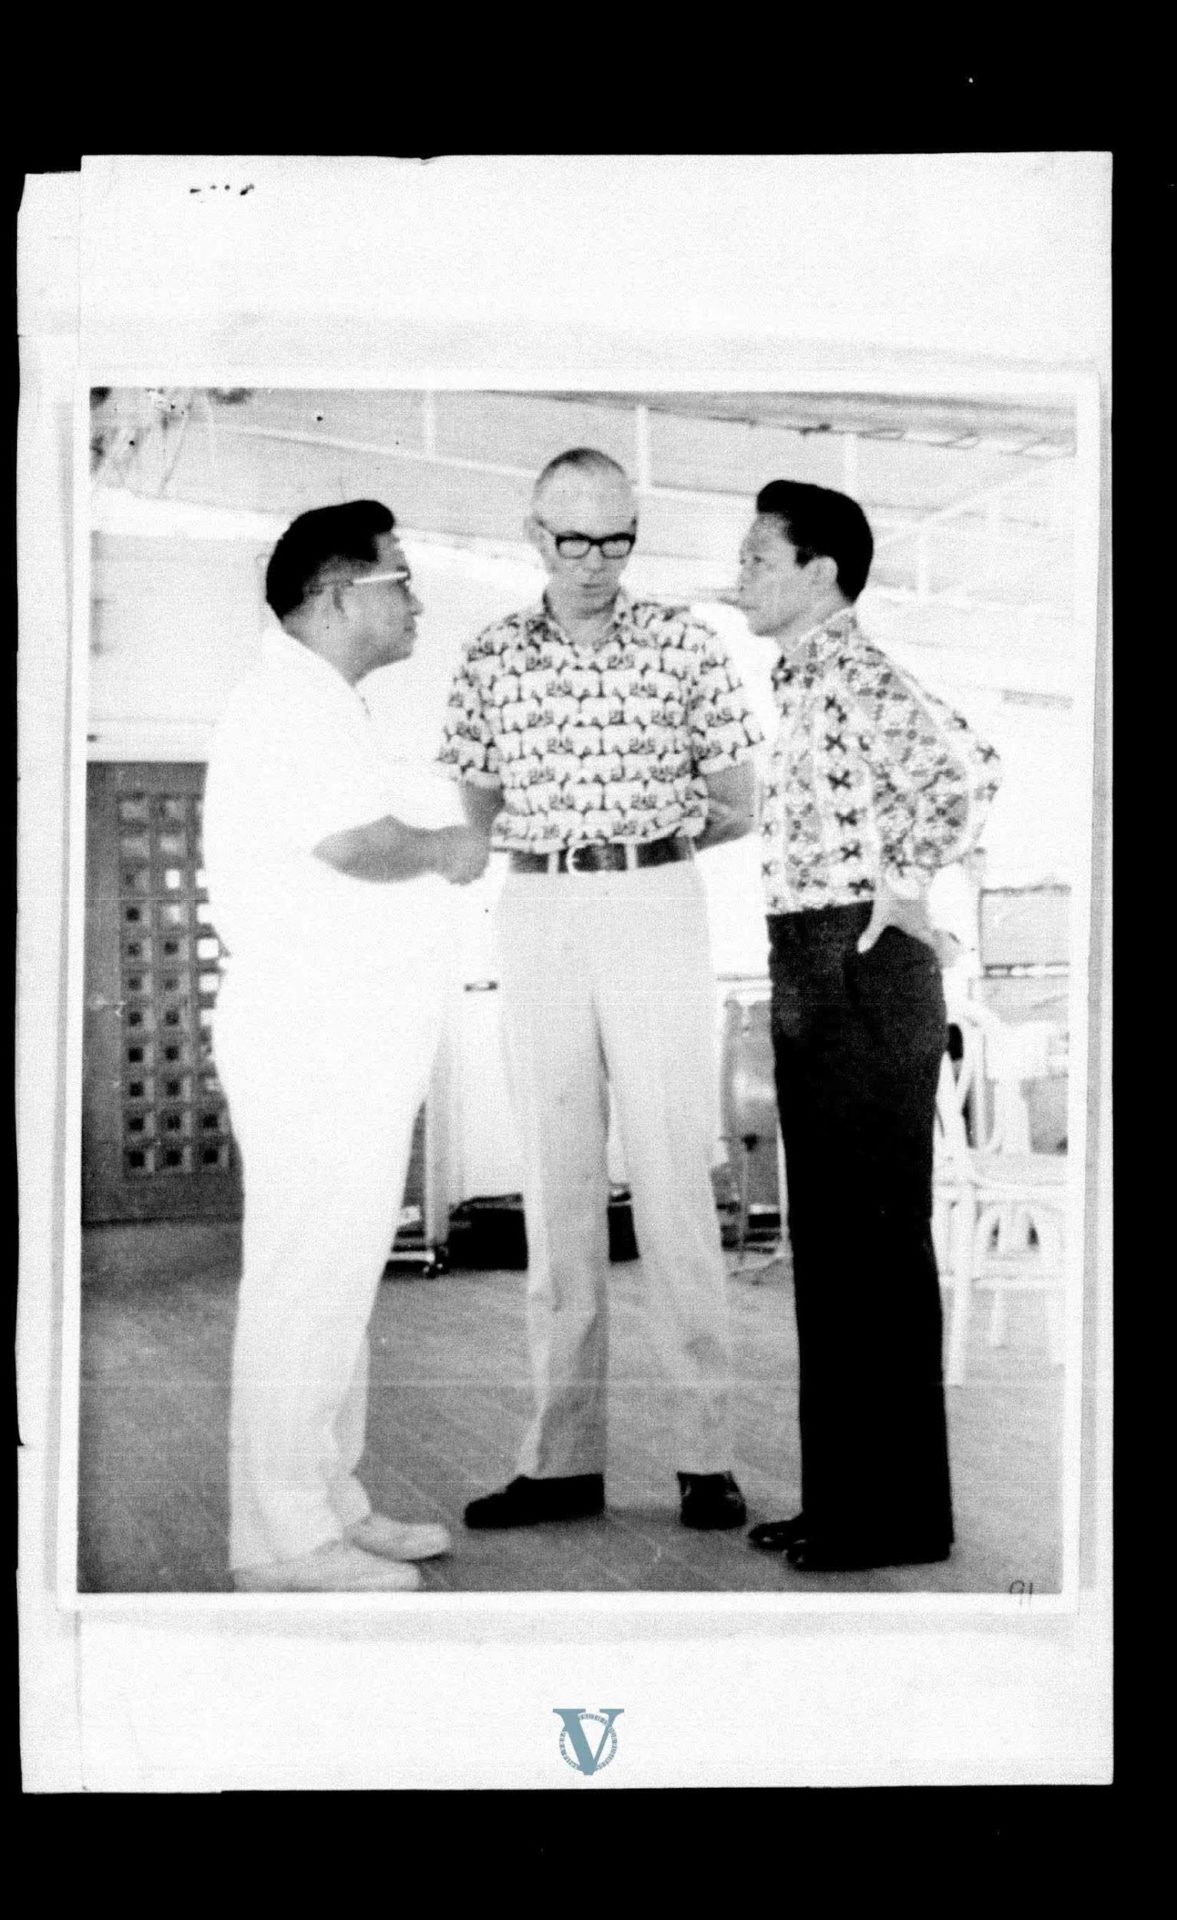 From left to right: Alejandro Melchor, Max Goldberger, and Ferdinand Marcos Sr. Photo from the digitized PCGG files.